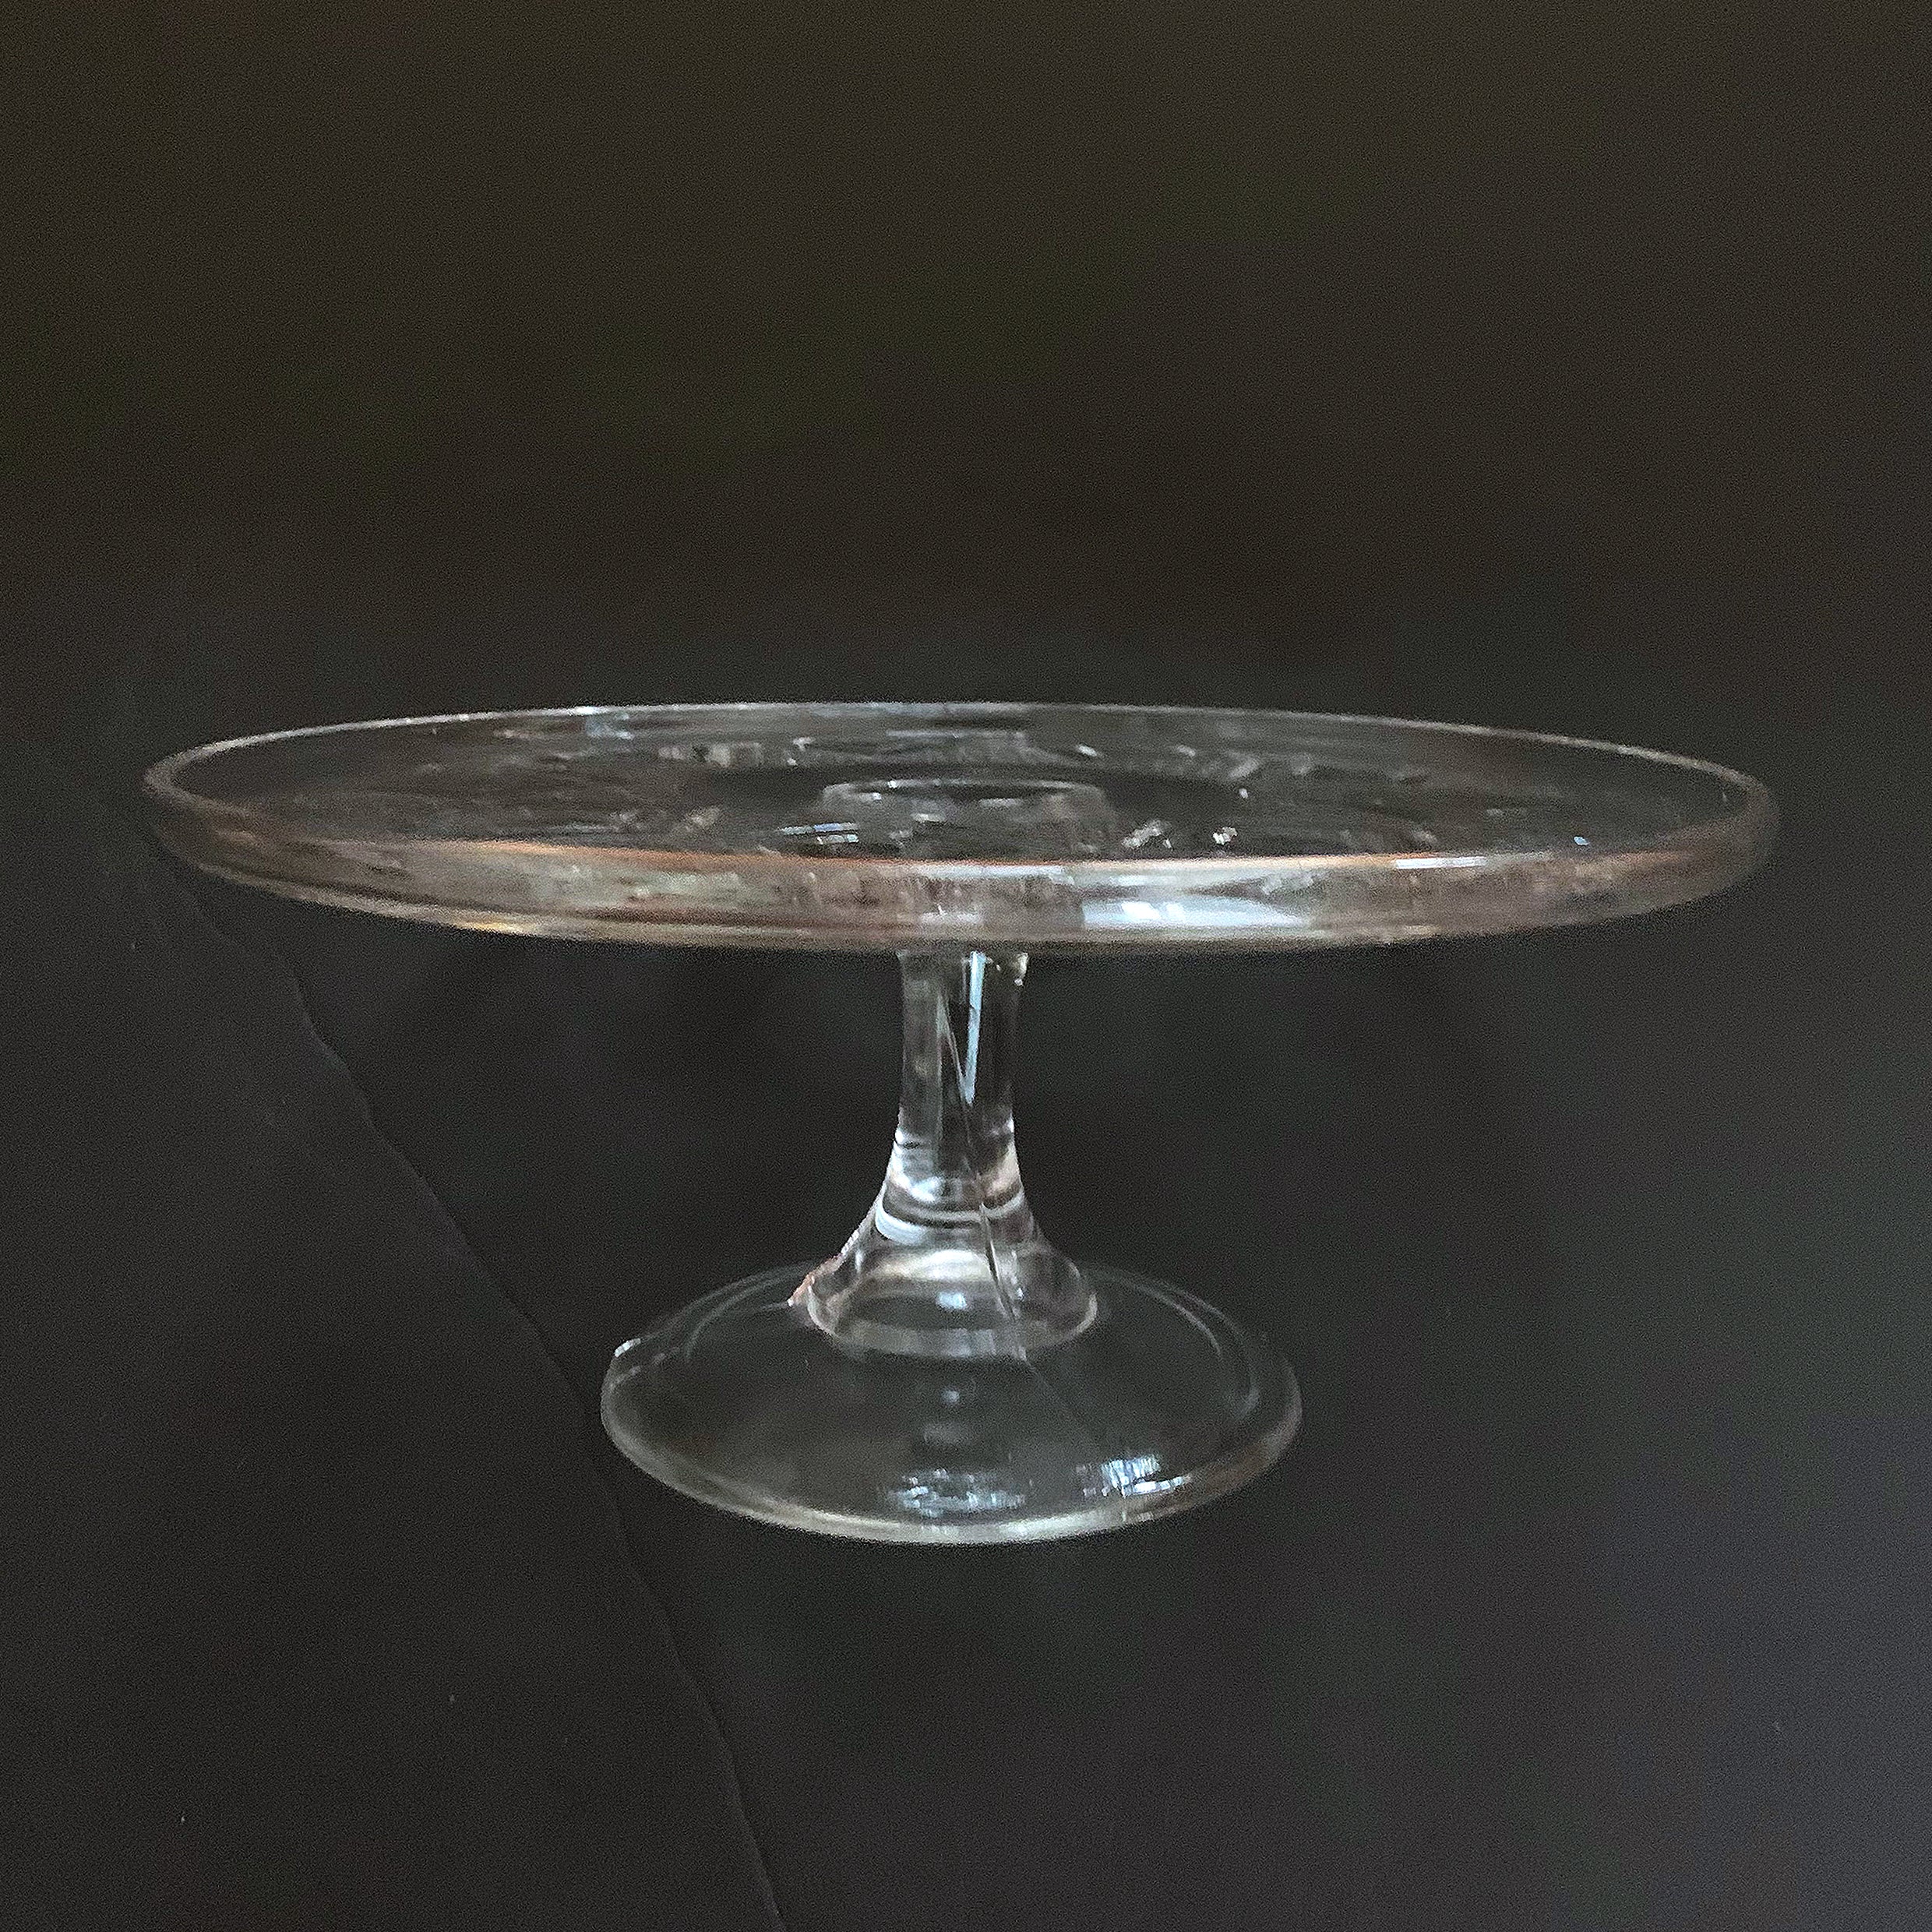 Cake Stands - The Frostery